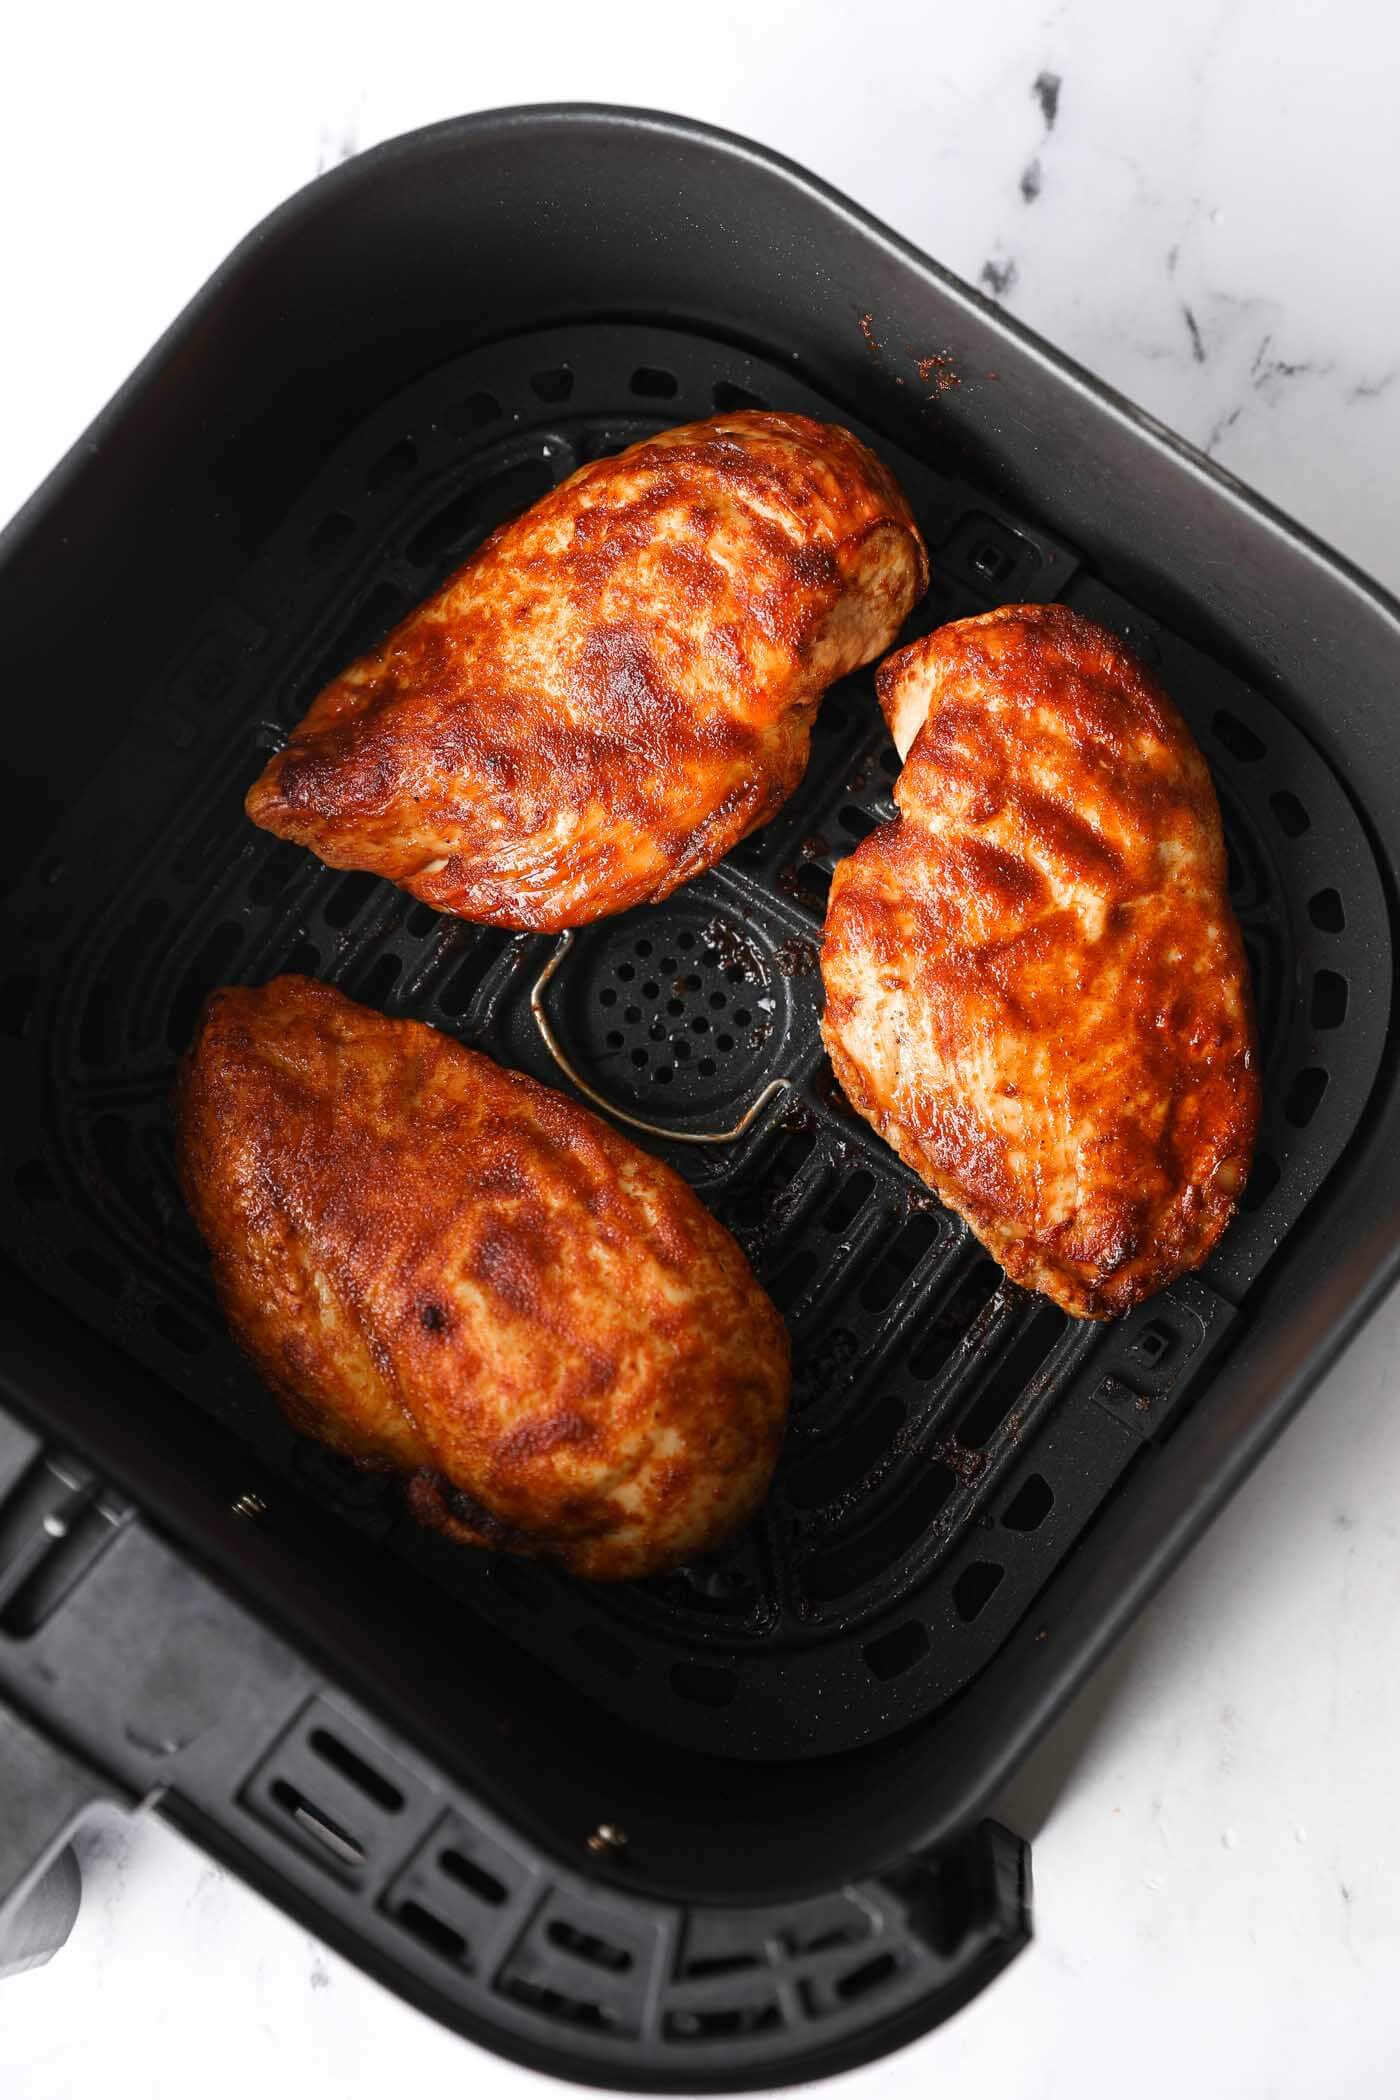 Frozen Chicken Breast in the Air Fryer Recipe - Home Cooked Harvest